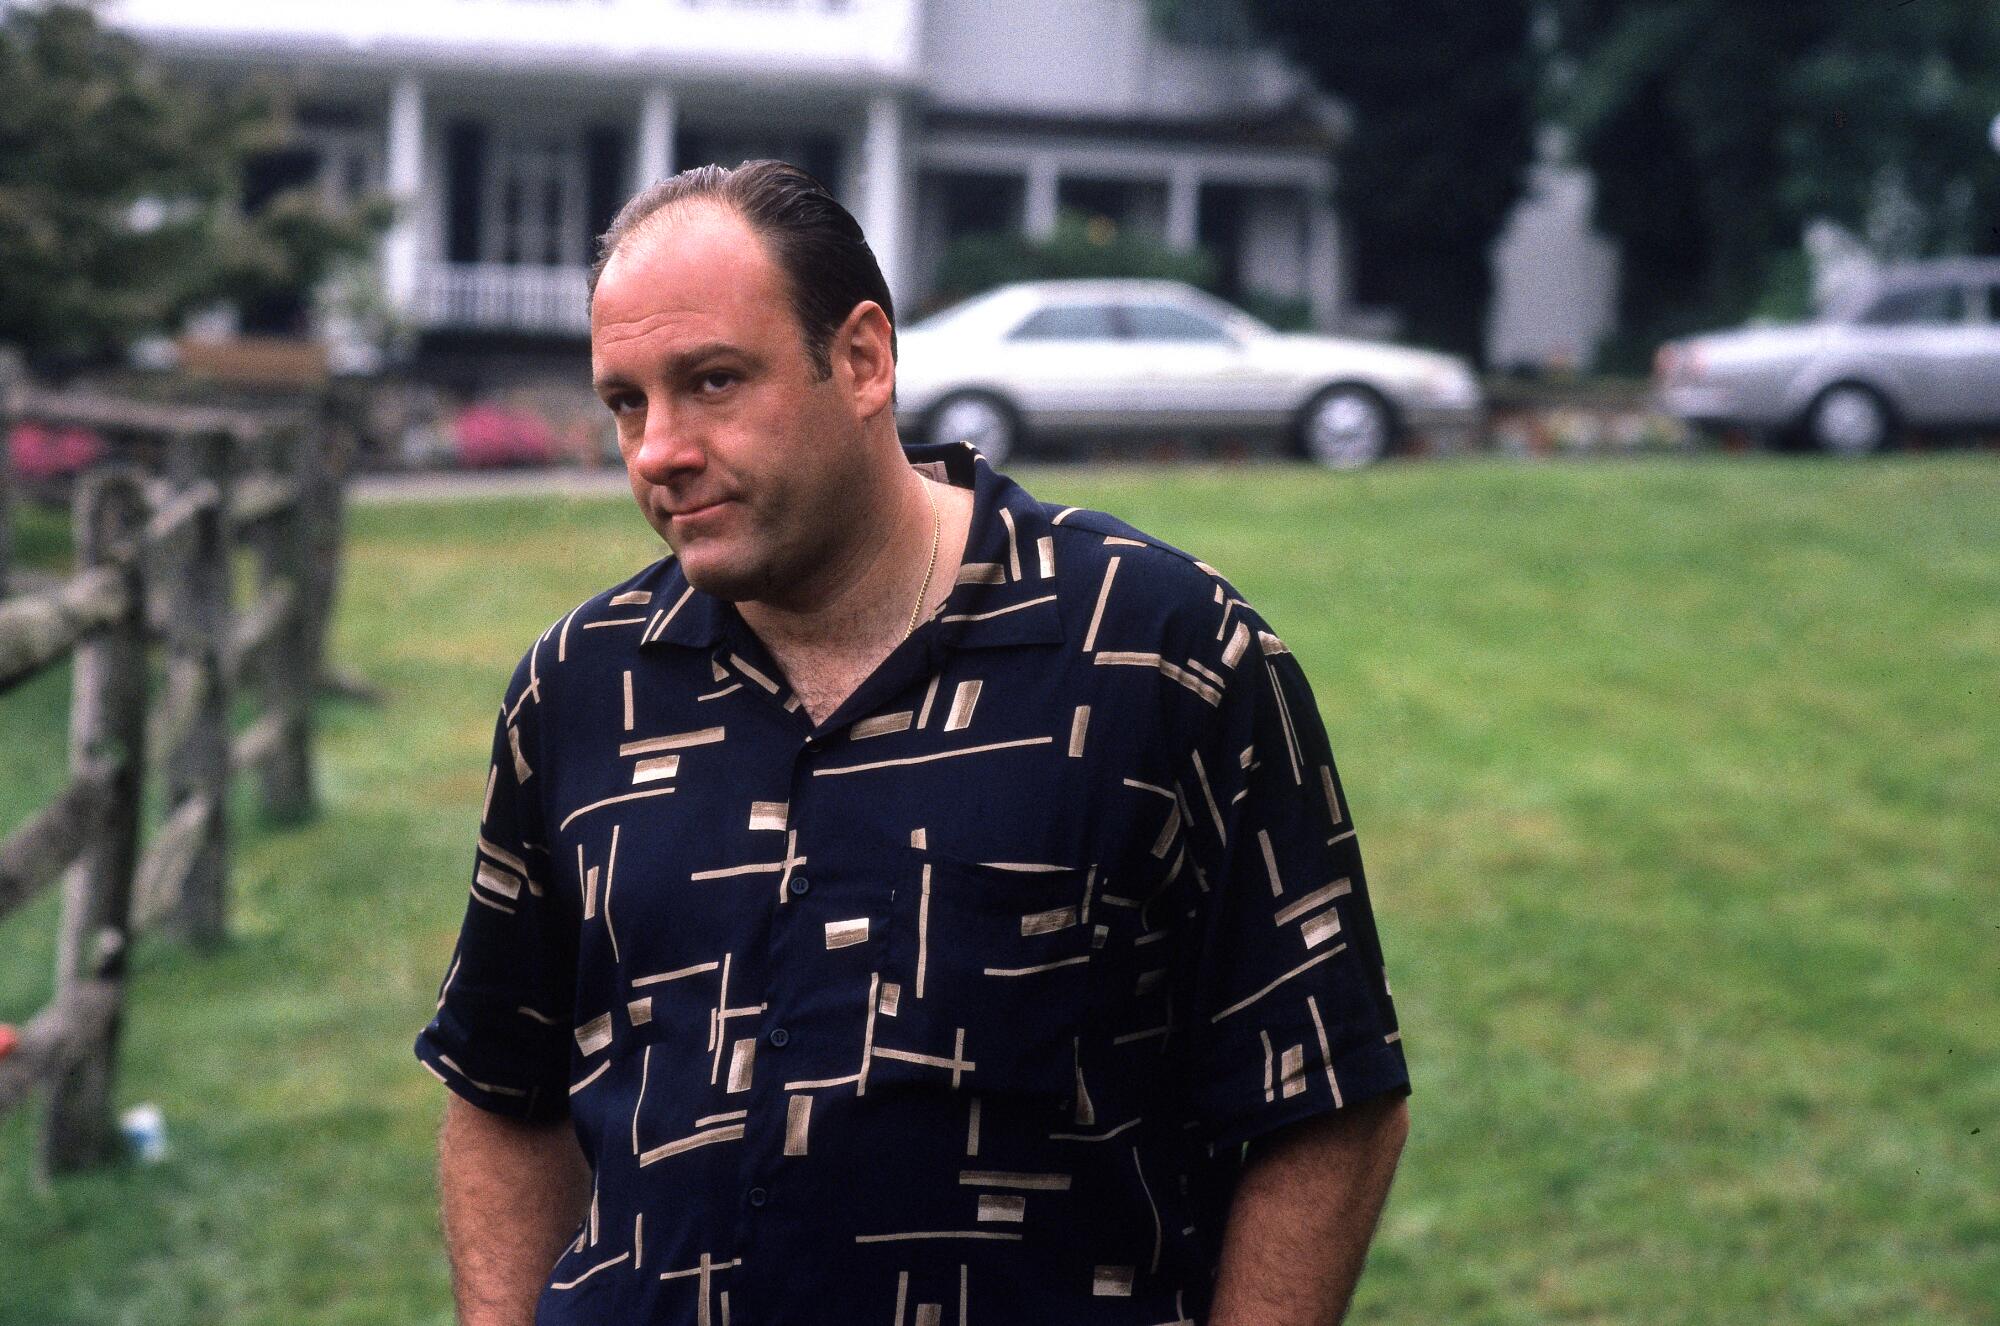 A man in a patterned collared shirt stands on a large lawn in front of a house with parked cars on the street.